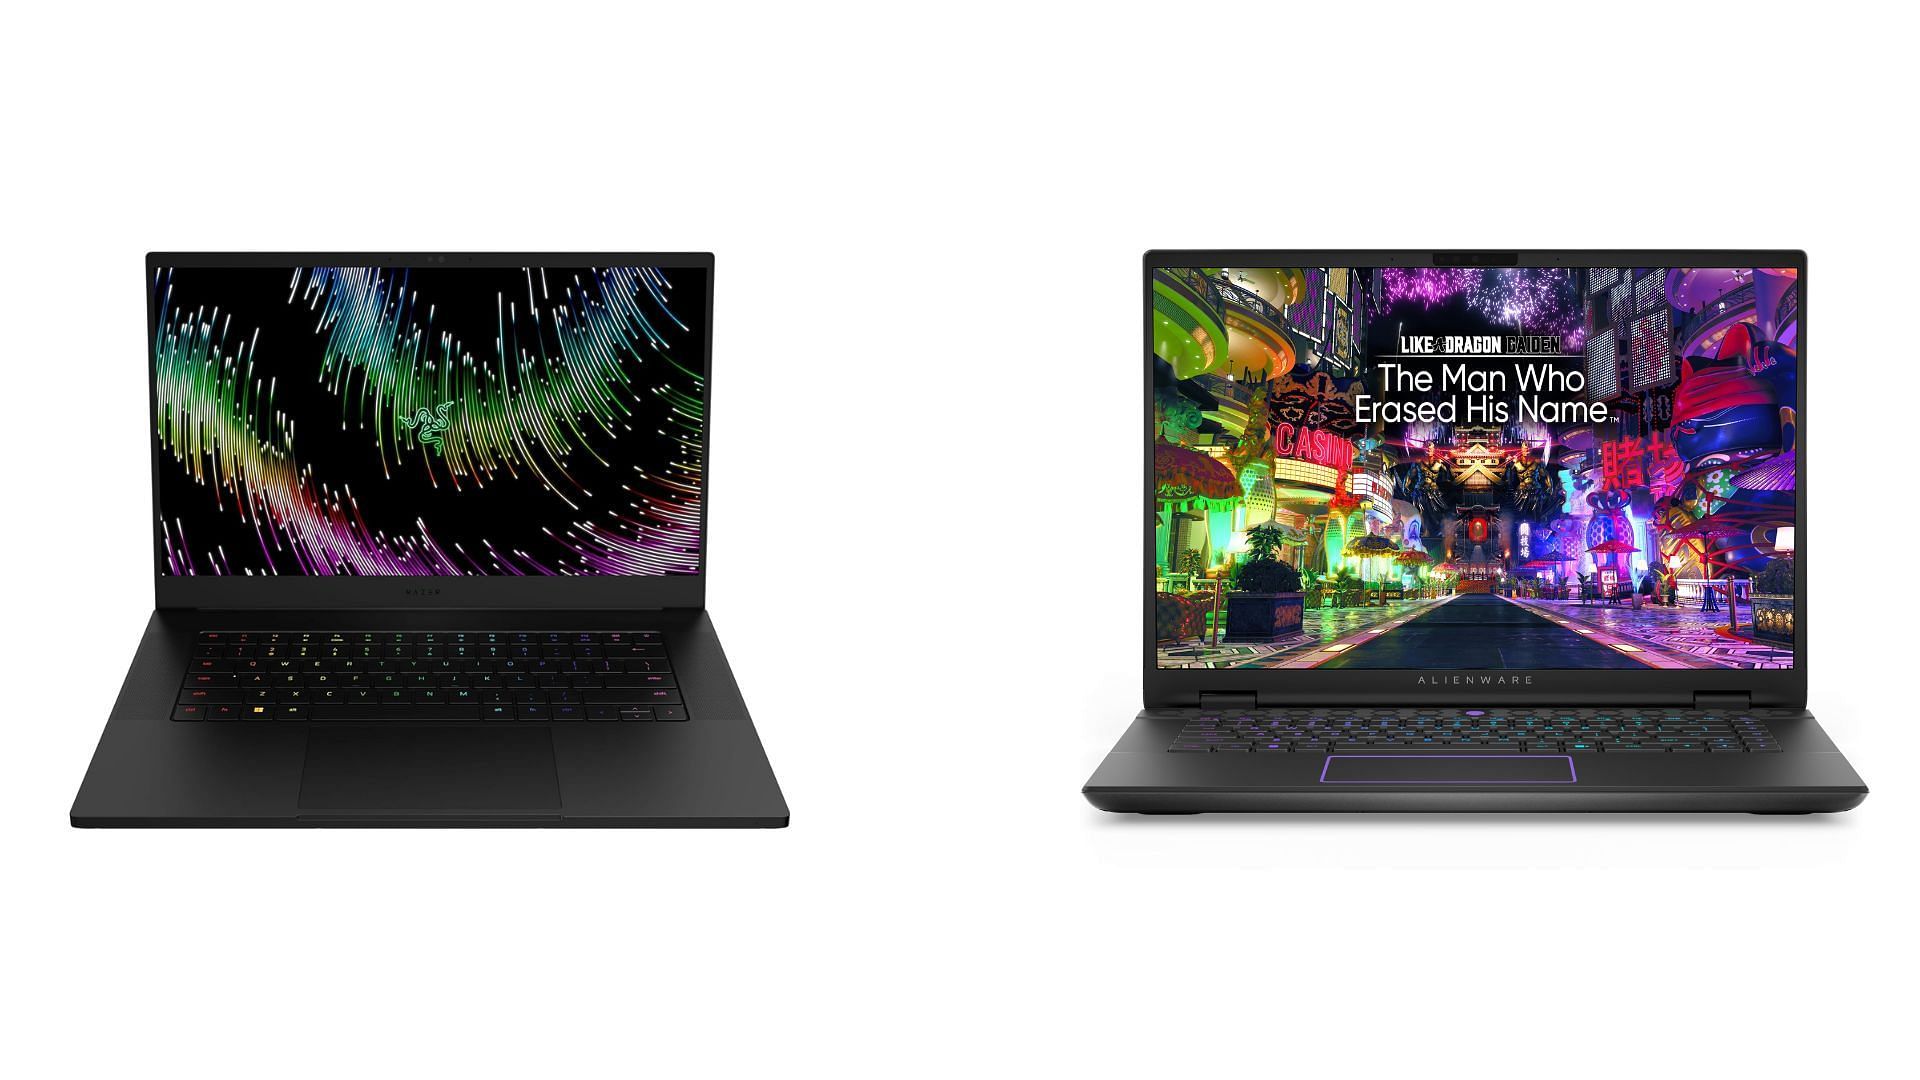 Both laptops feature top-of-the-line specifications (Image via Razer and Dell)